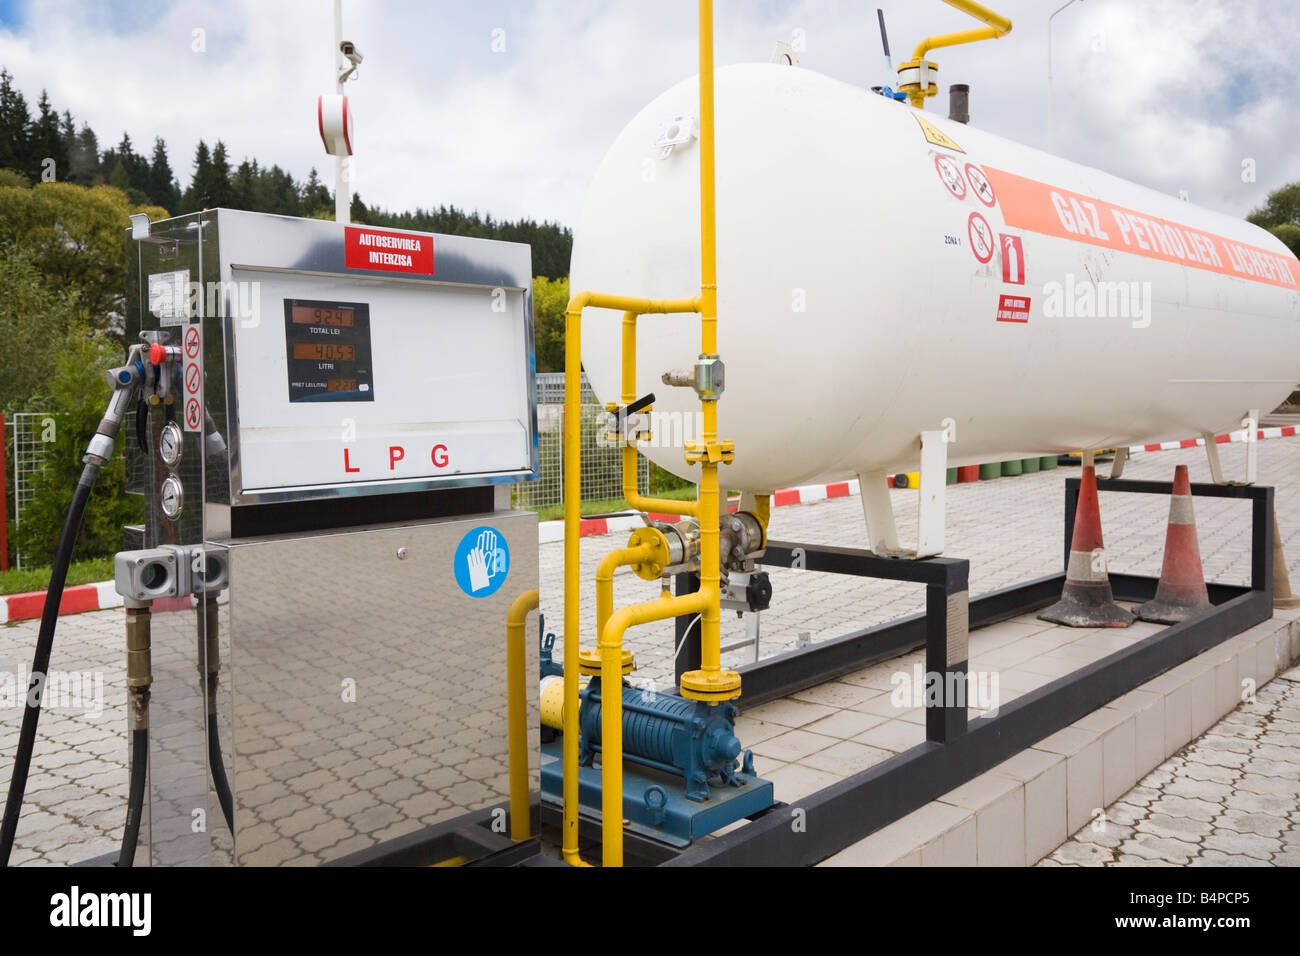 Romania Europe Fuel pump by large tank of Liquid Petroleum Gas LPG on filling station forecourt Stock Photo